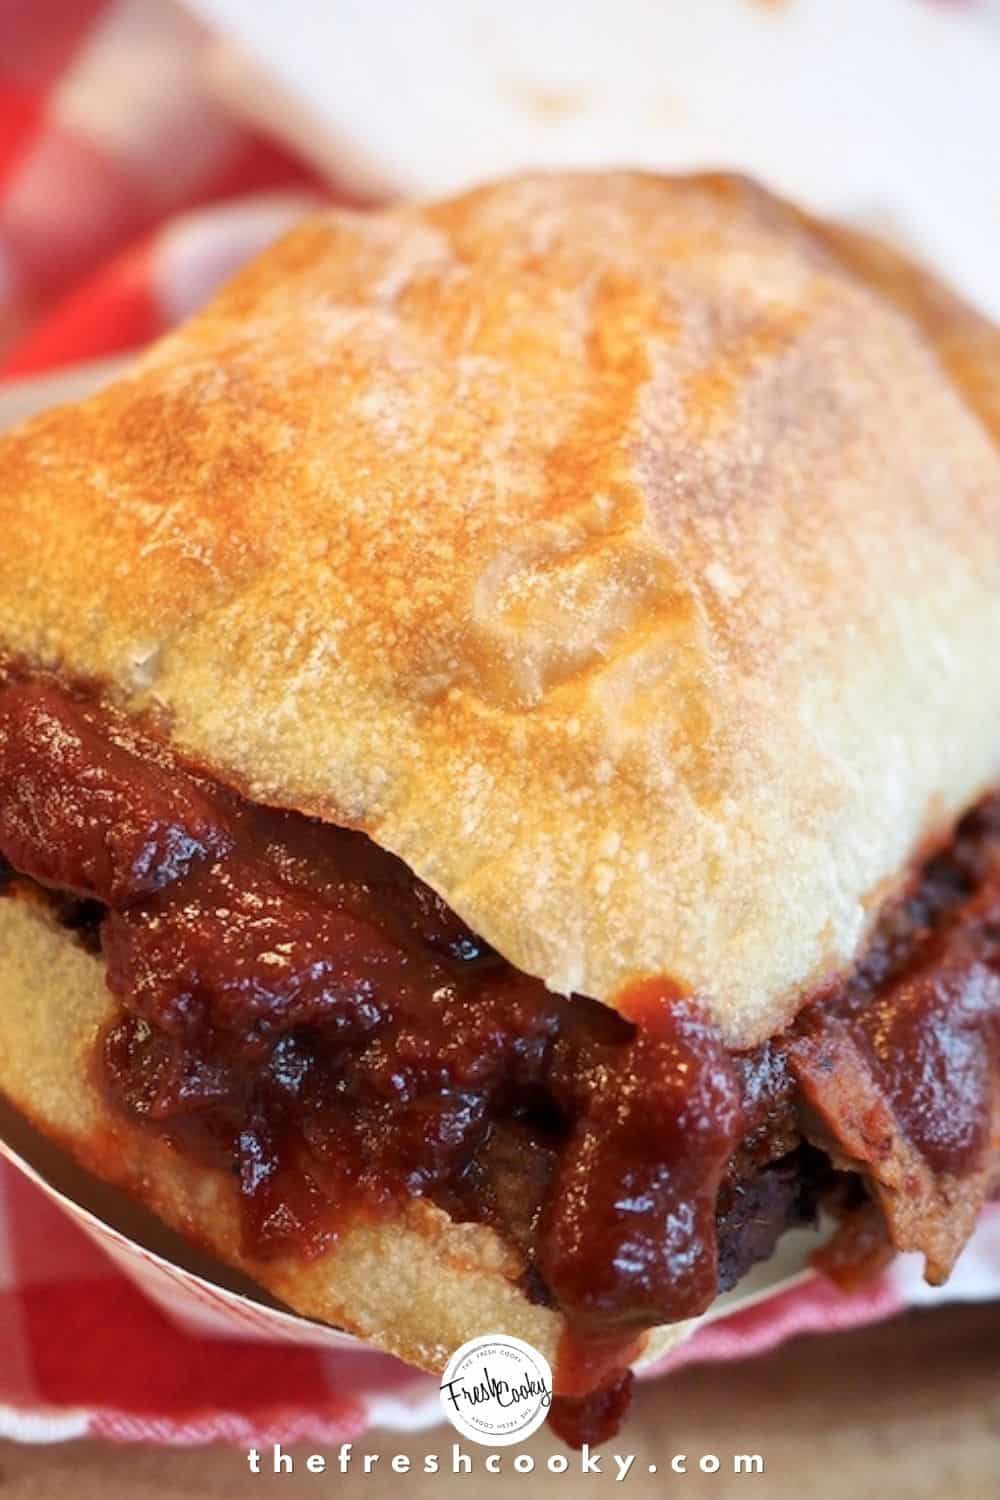 Beef brisket with barbecue sauce on ciabatta roll. 